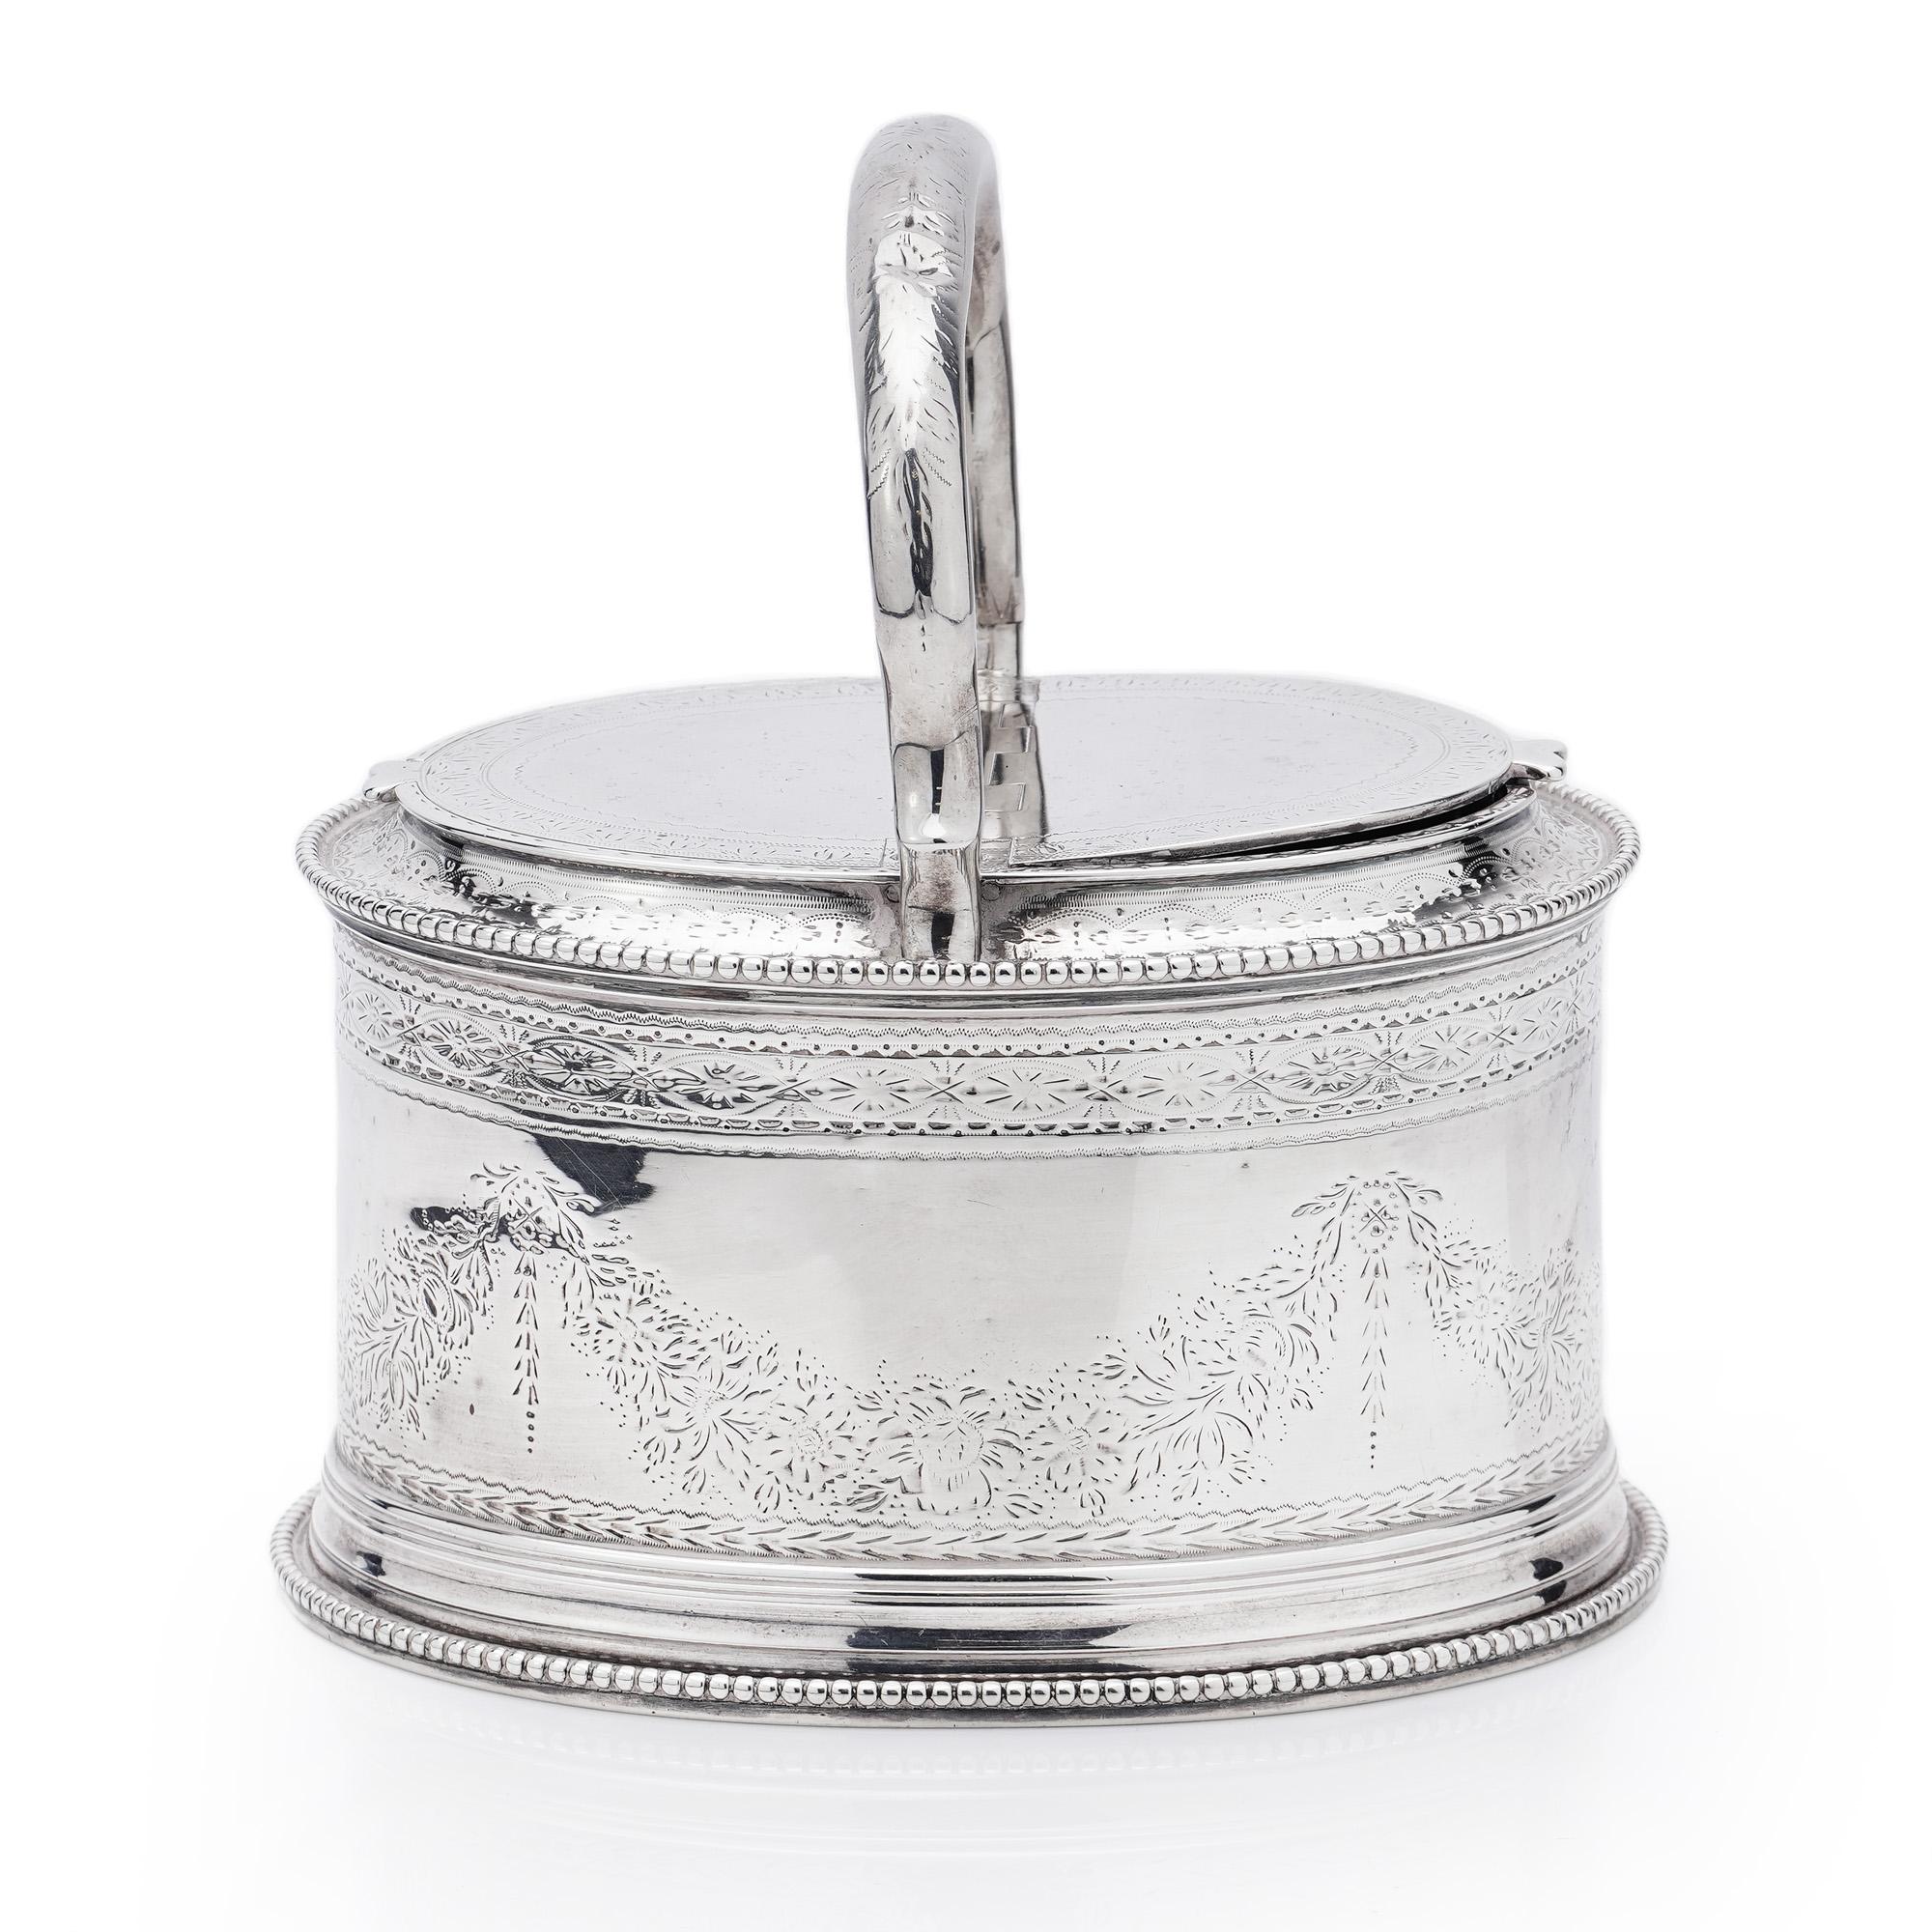 Antique Victorian sterling silver double tea caddy. 
Maker: Charles Frederick Hancock
Made in London, 1862
Fully hallmarked.

Tea caddy is oval shaped, has two  compartments, body decorated with floral garlands. 

Dimensions - 
Length : 15 cm 